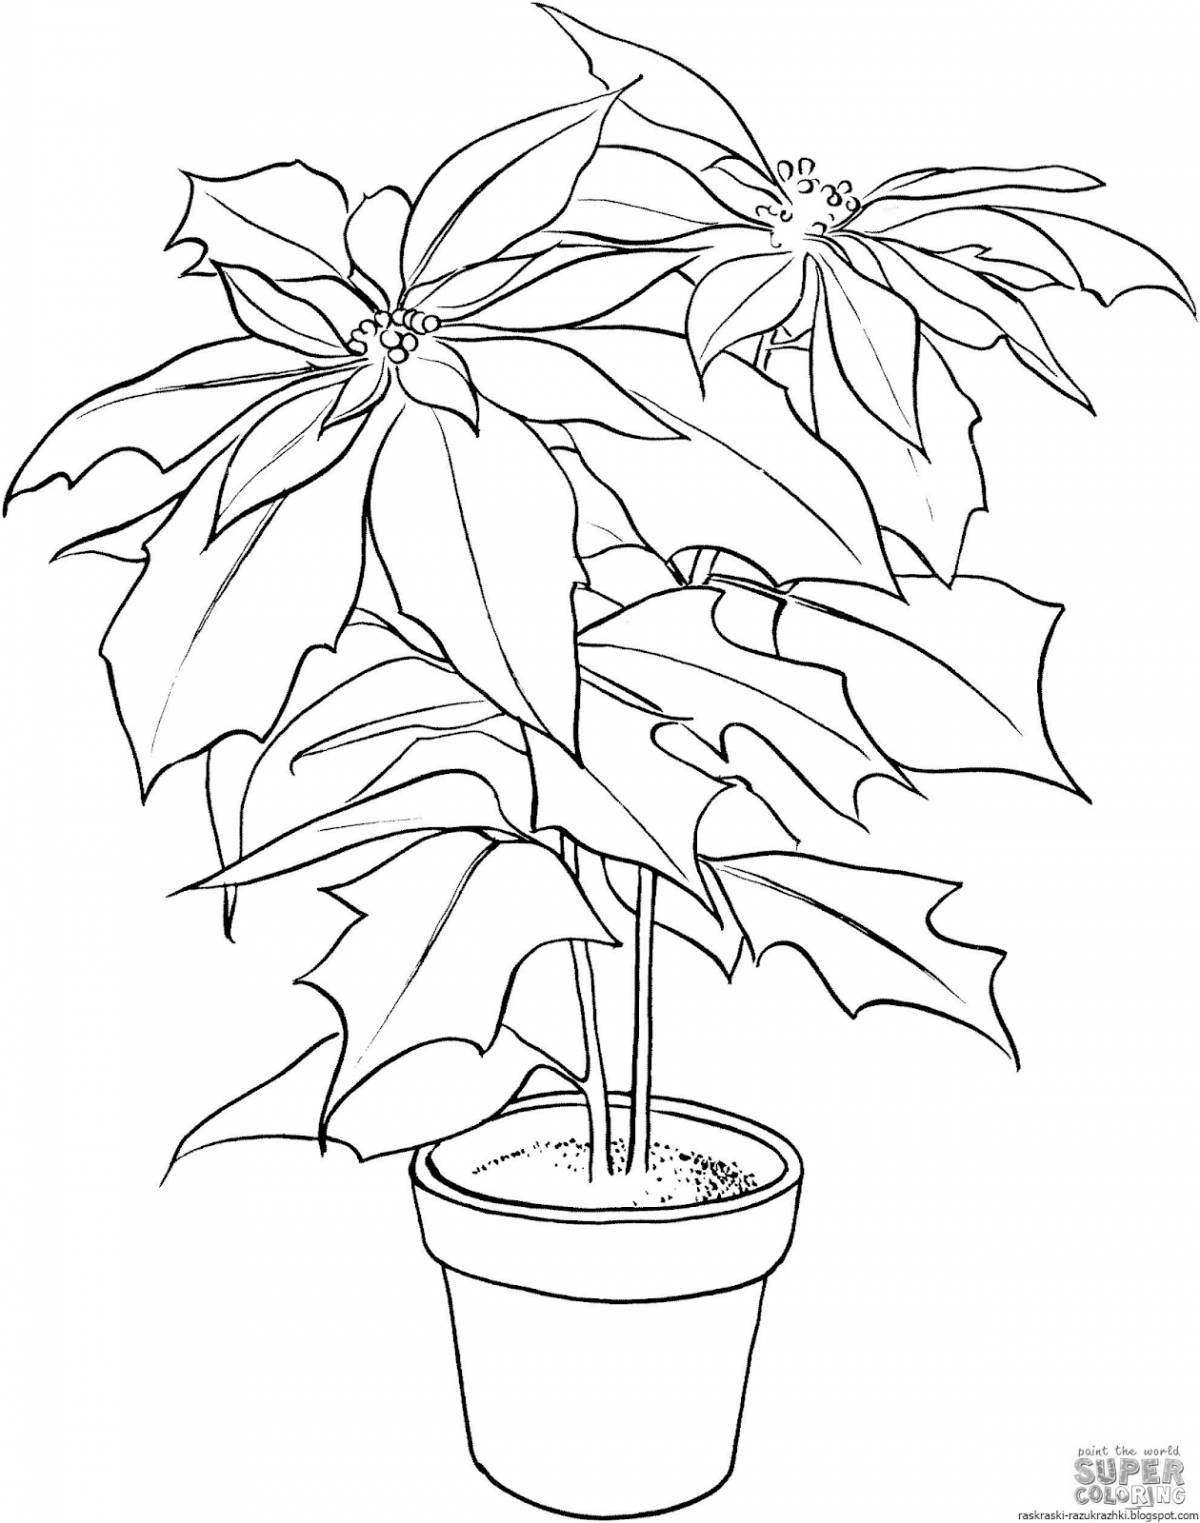 A fun indoor plant coloring book for 6-7 year olds